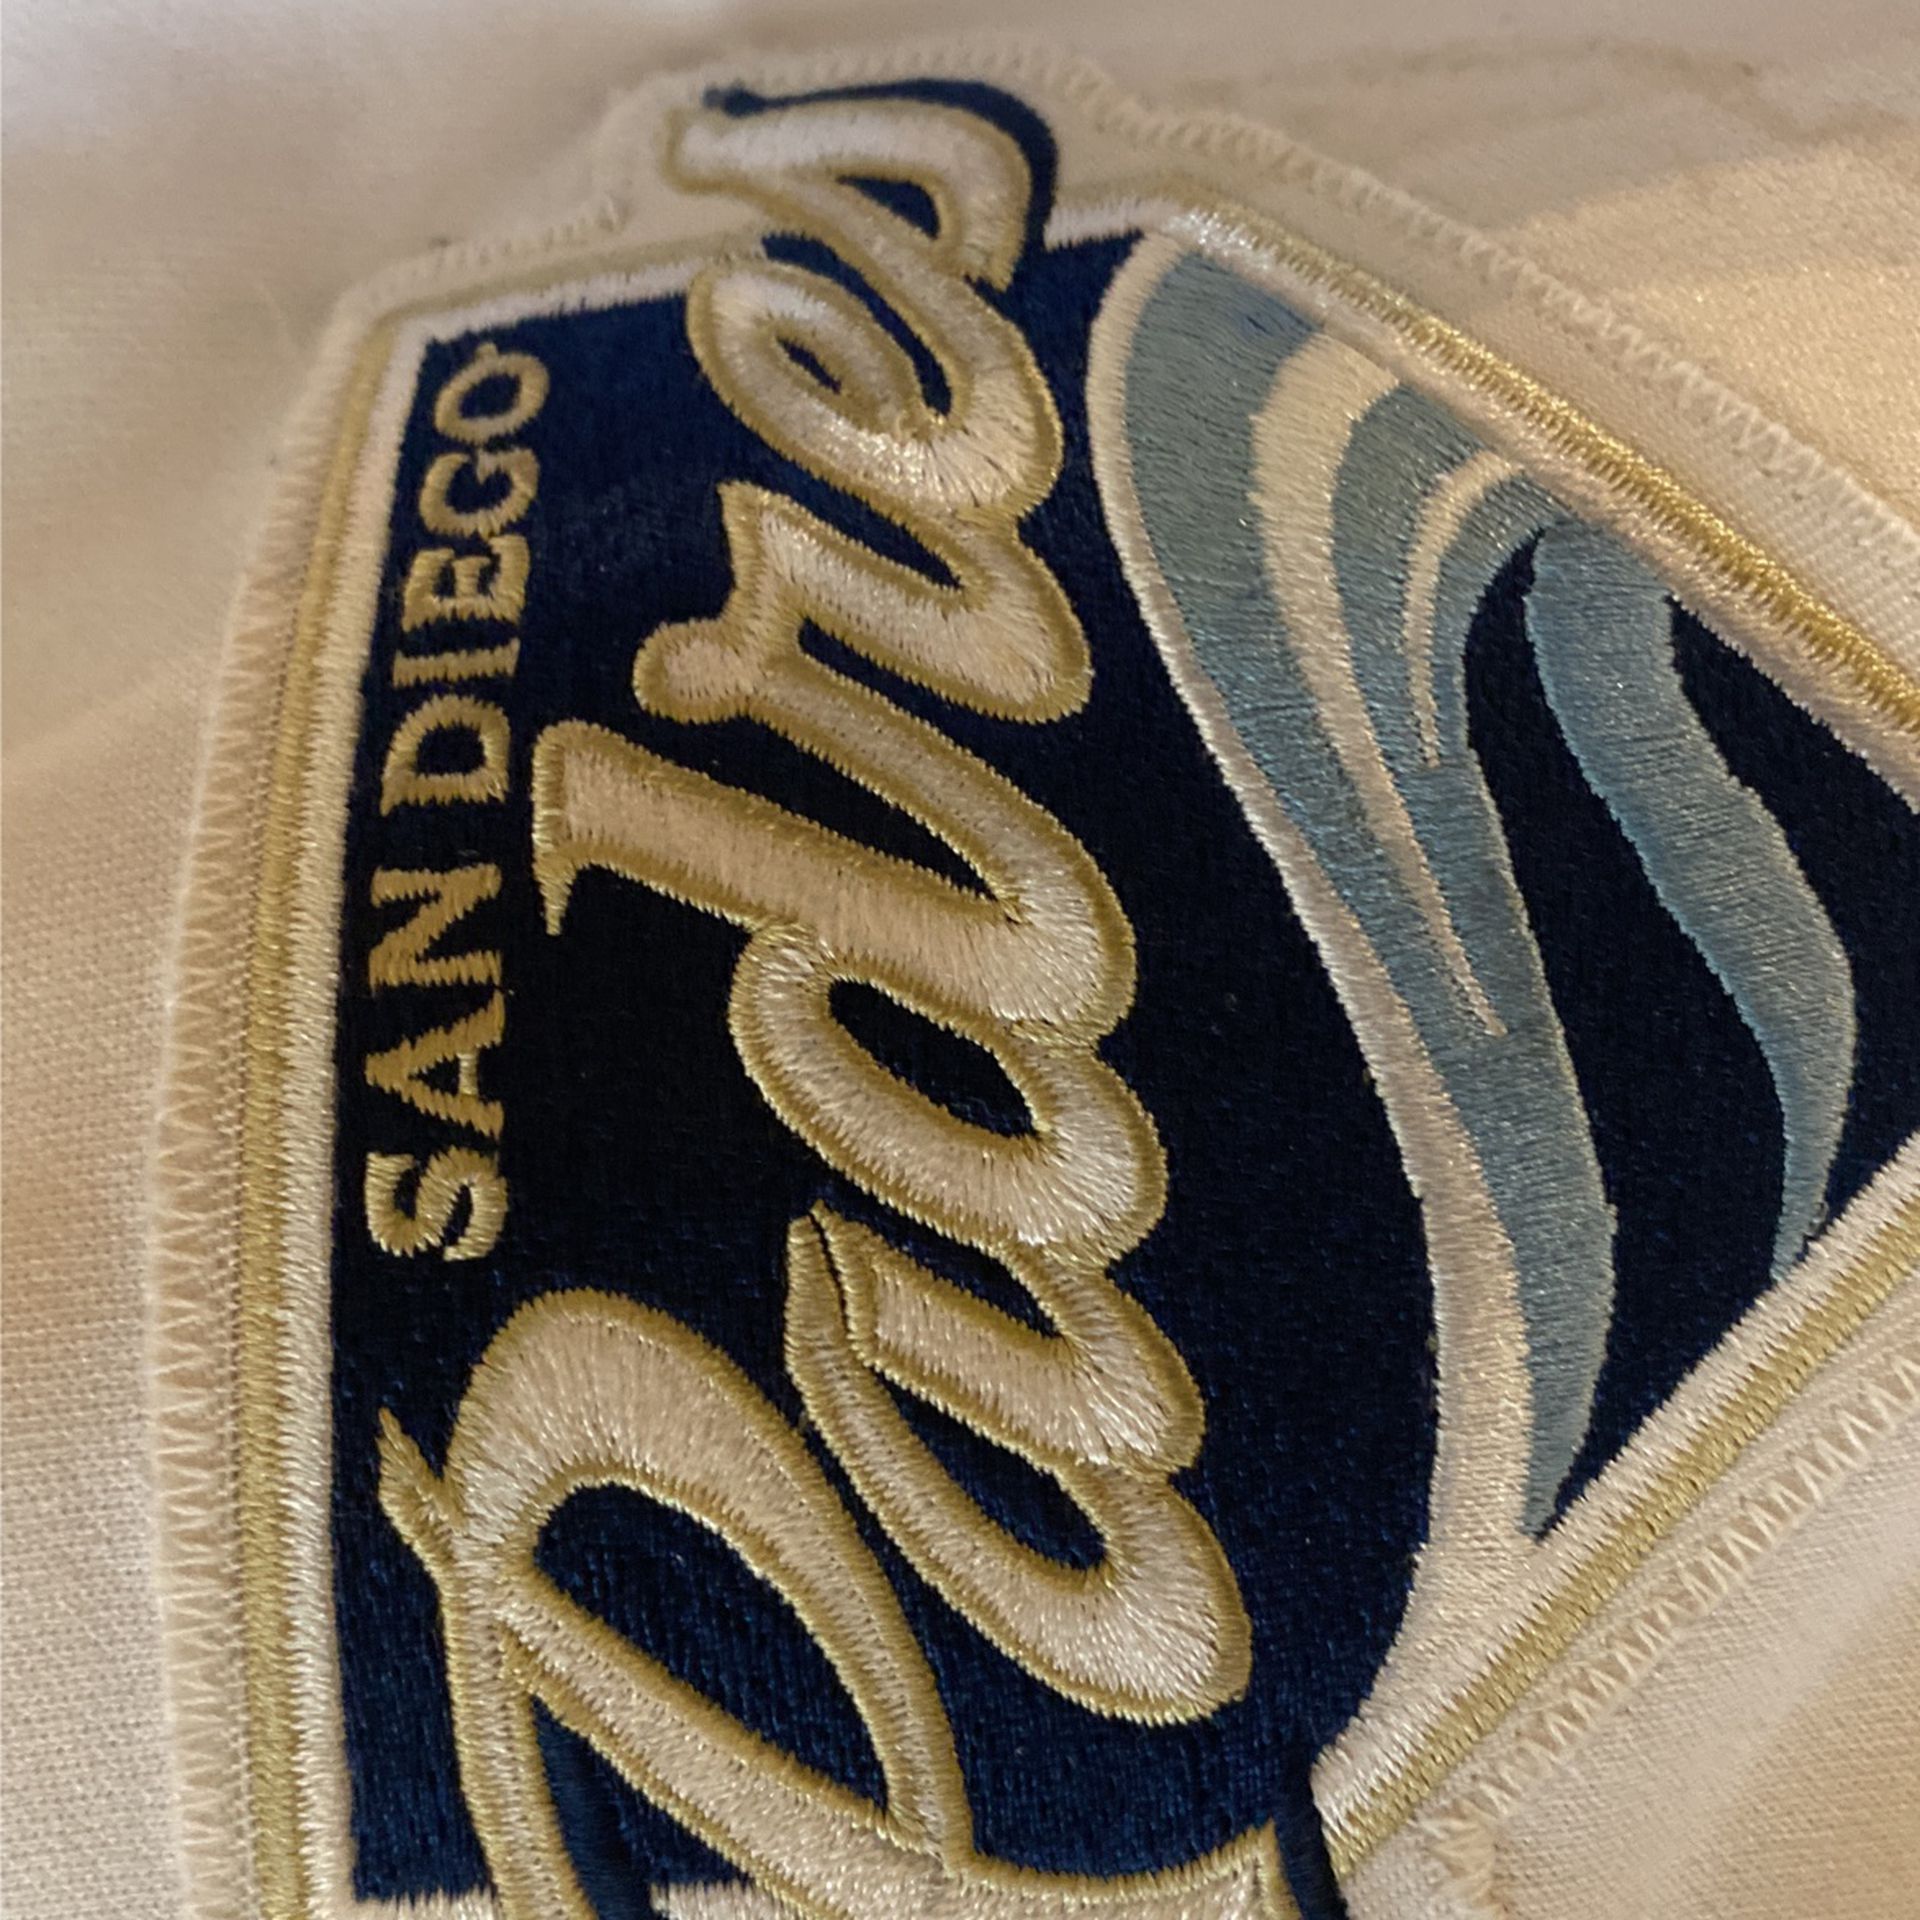 Padres City Connect Jersey for Sale in La Mesa, CA - OfferUp